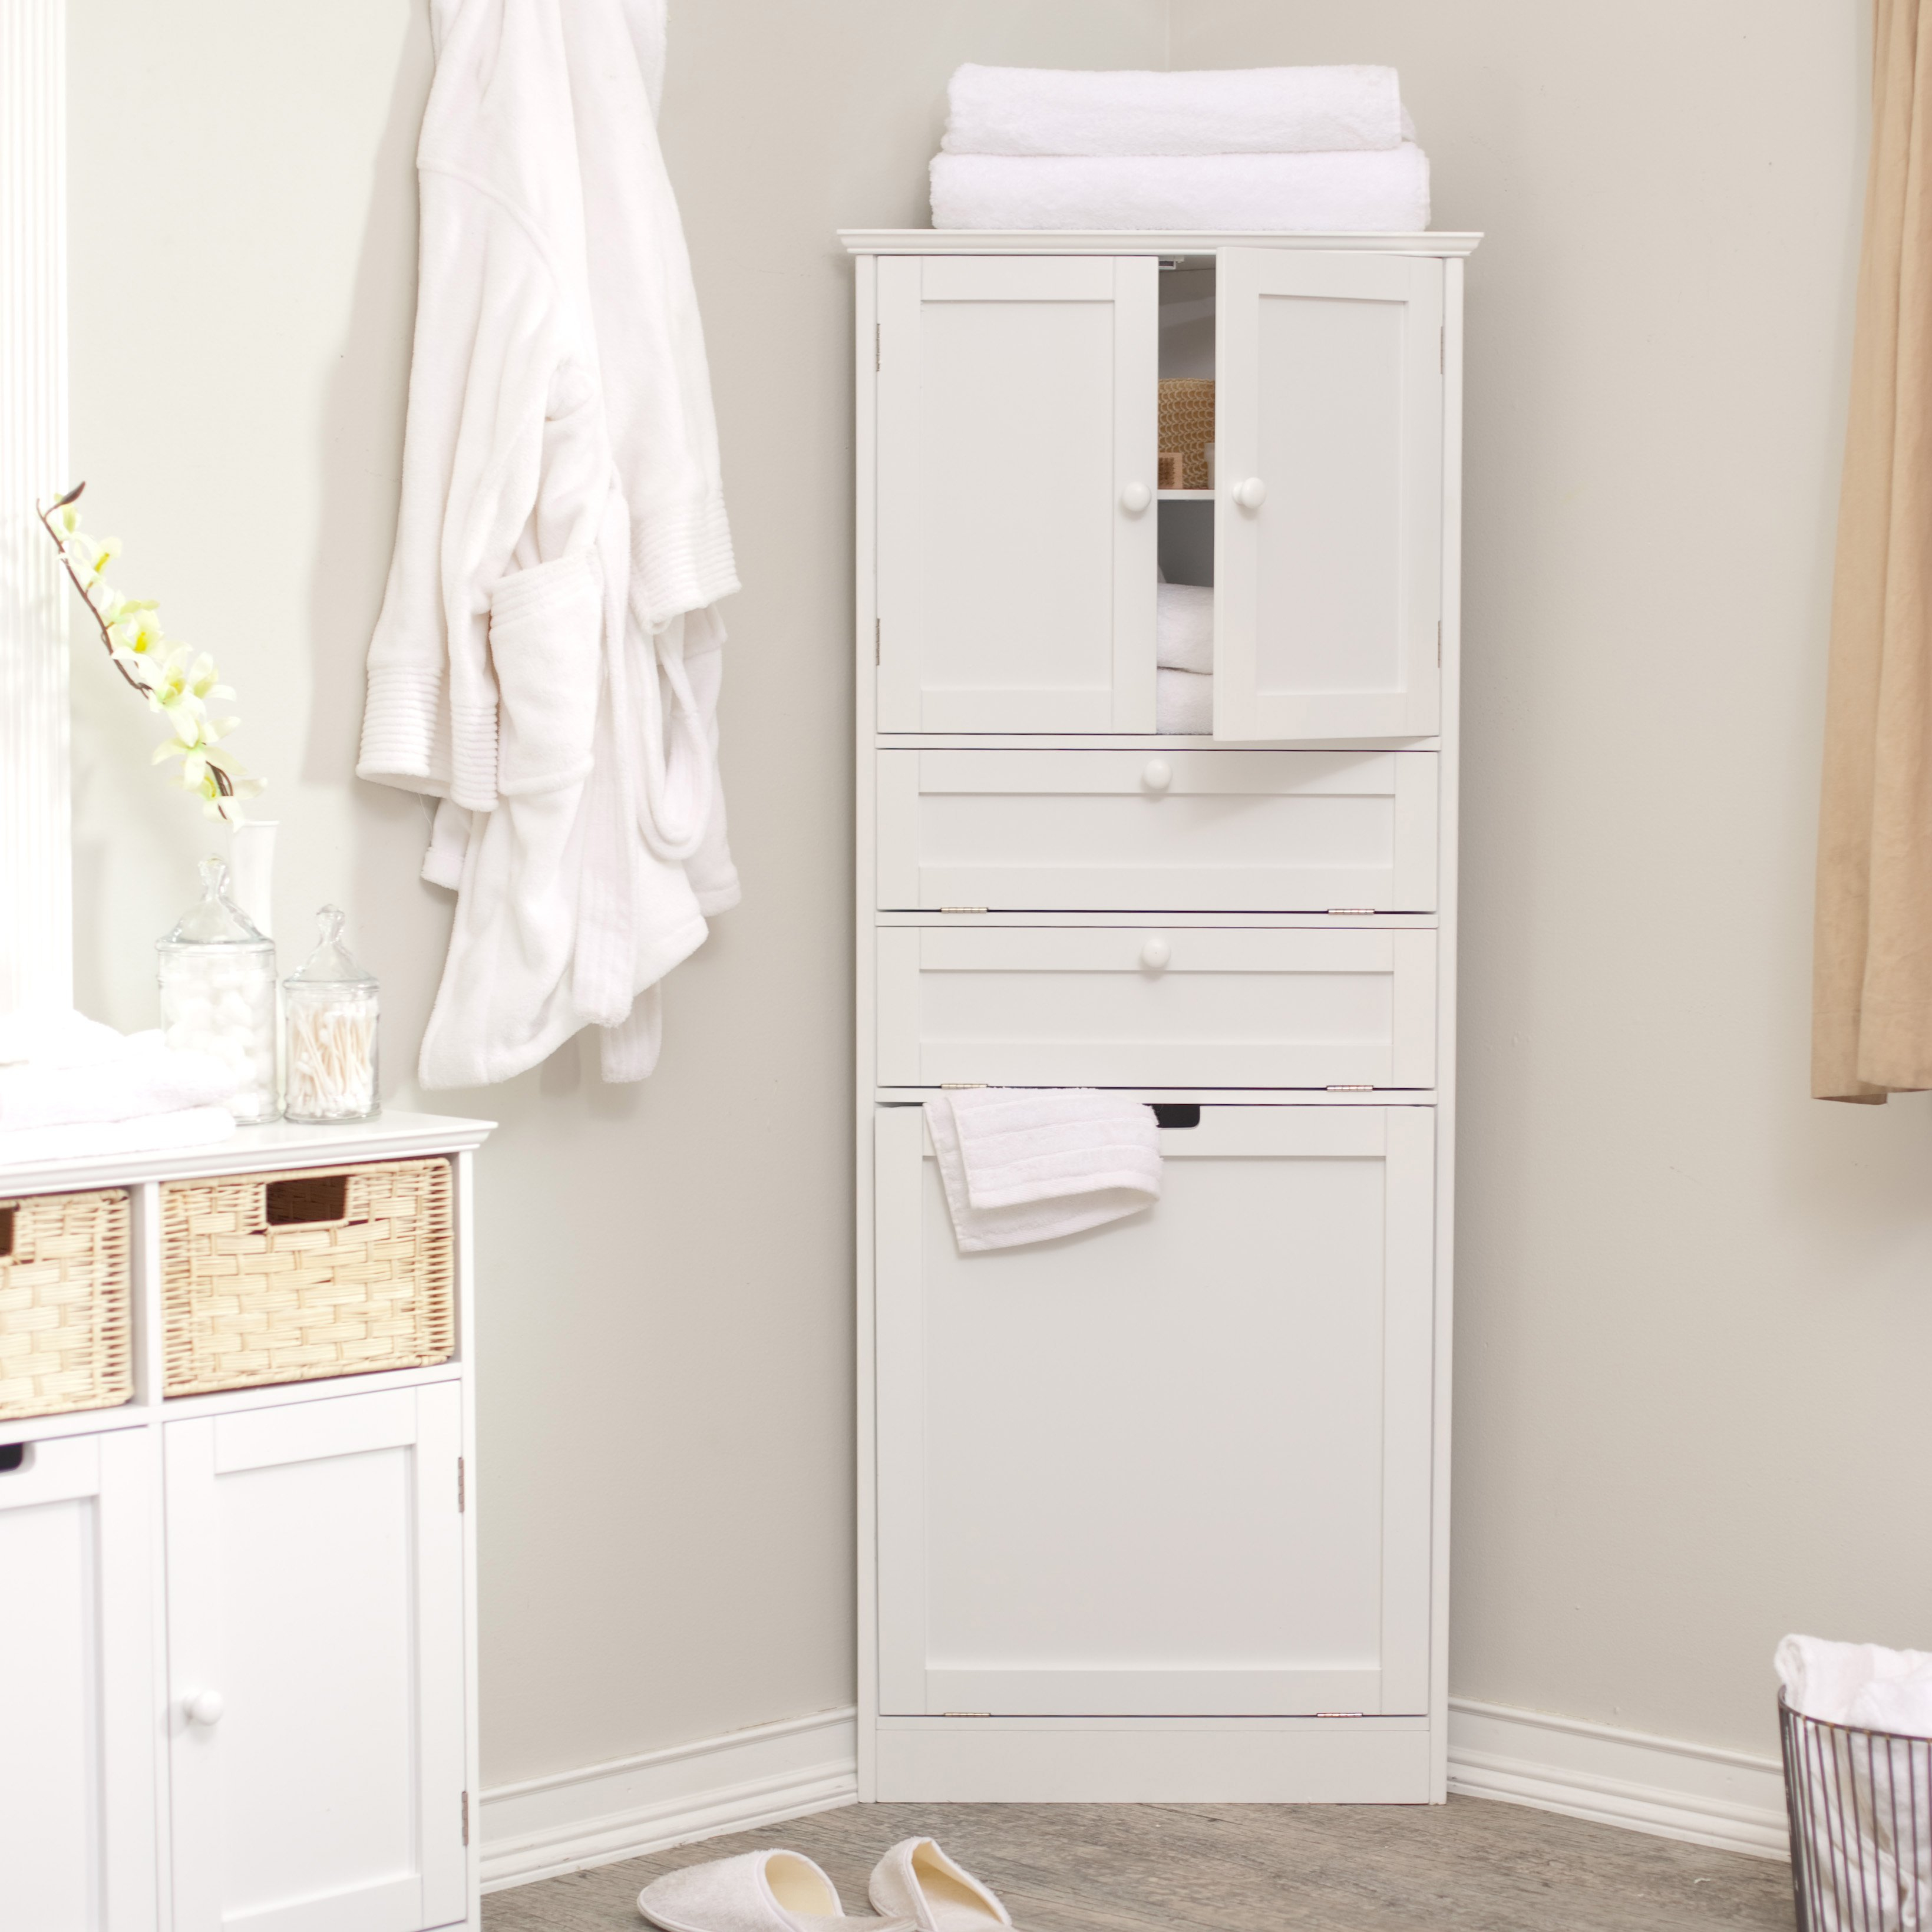 Impressive White Bathroom Storage Cabinets Pertaining To Home Design throughout dimensions 3279 X 3279